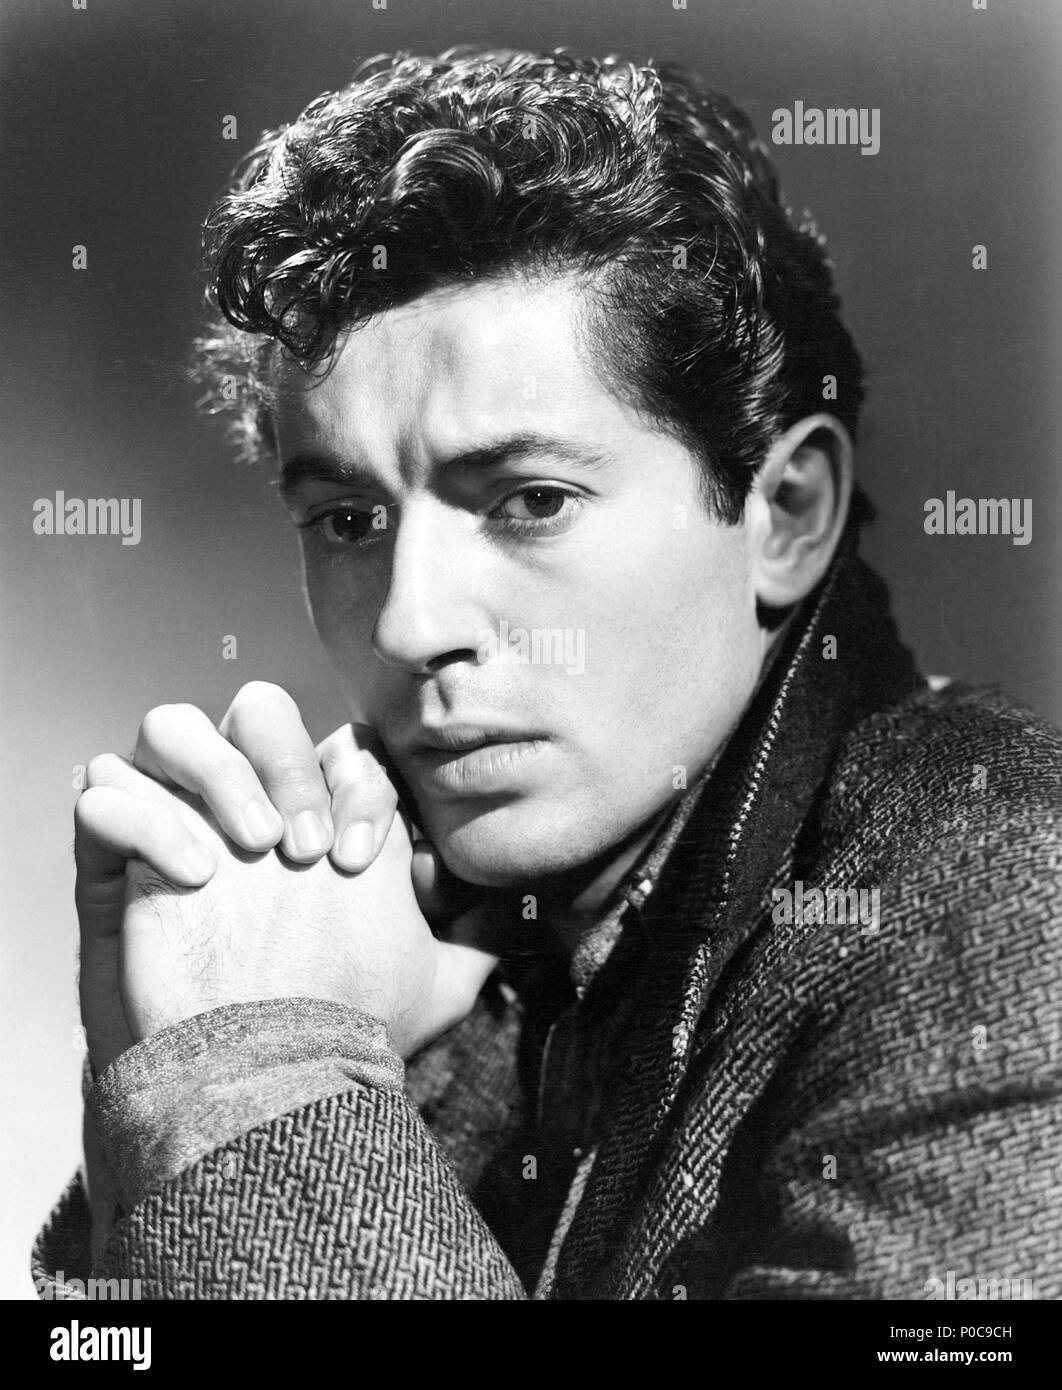 Original Film Title: I WANT YOU.  English Title: I WANT YOU.  Film Director: MARK ROBSON.  Year: 1951.  Stars: FARLEY GRANGER. Credit: RKO RADIO PICTURES / Album Stock Photo